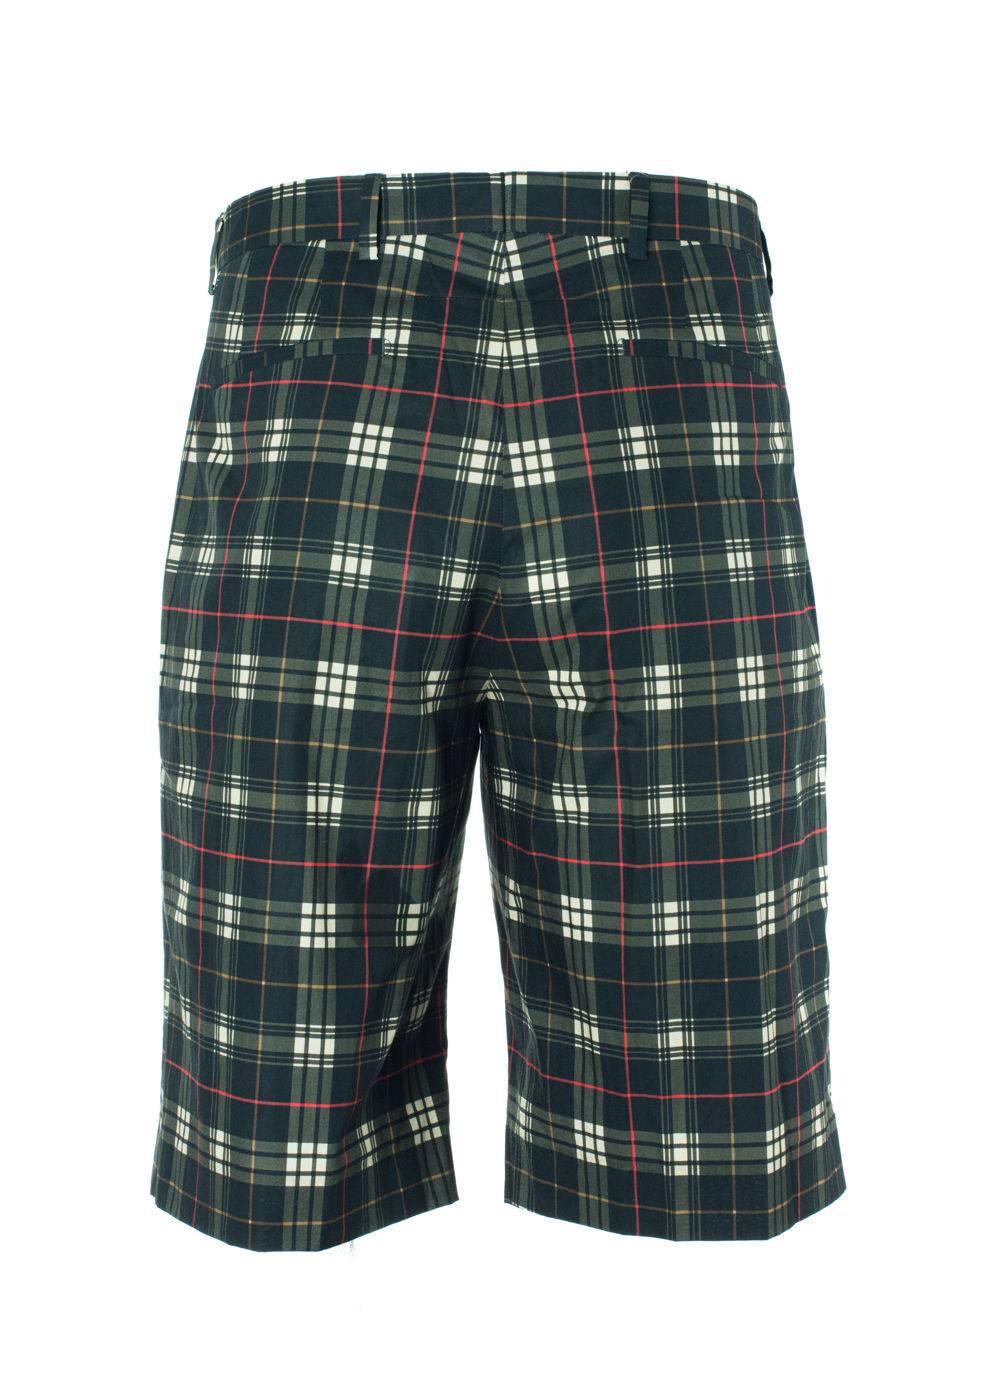 Givenchy Mens 100% Cotton Black Plaid Board Shorts In New Condition For Sale In Brooklyn, NY